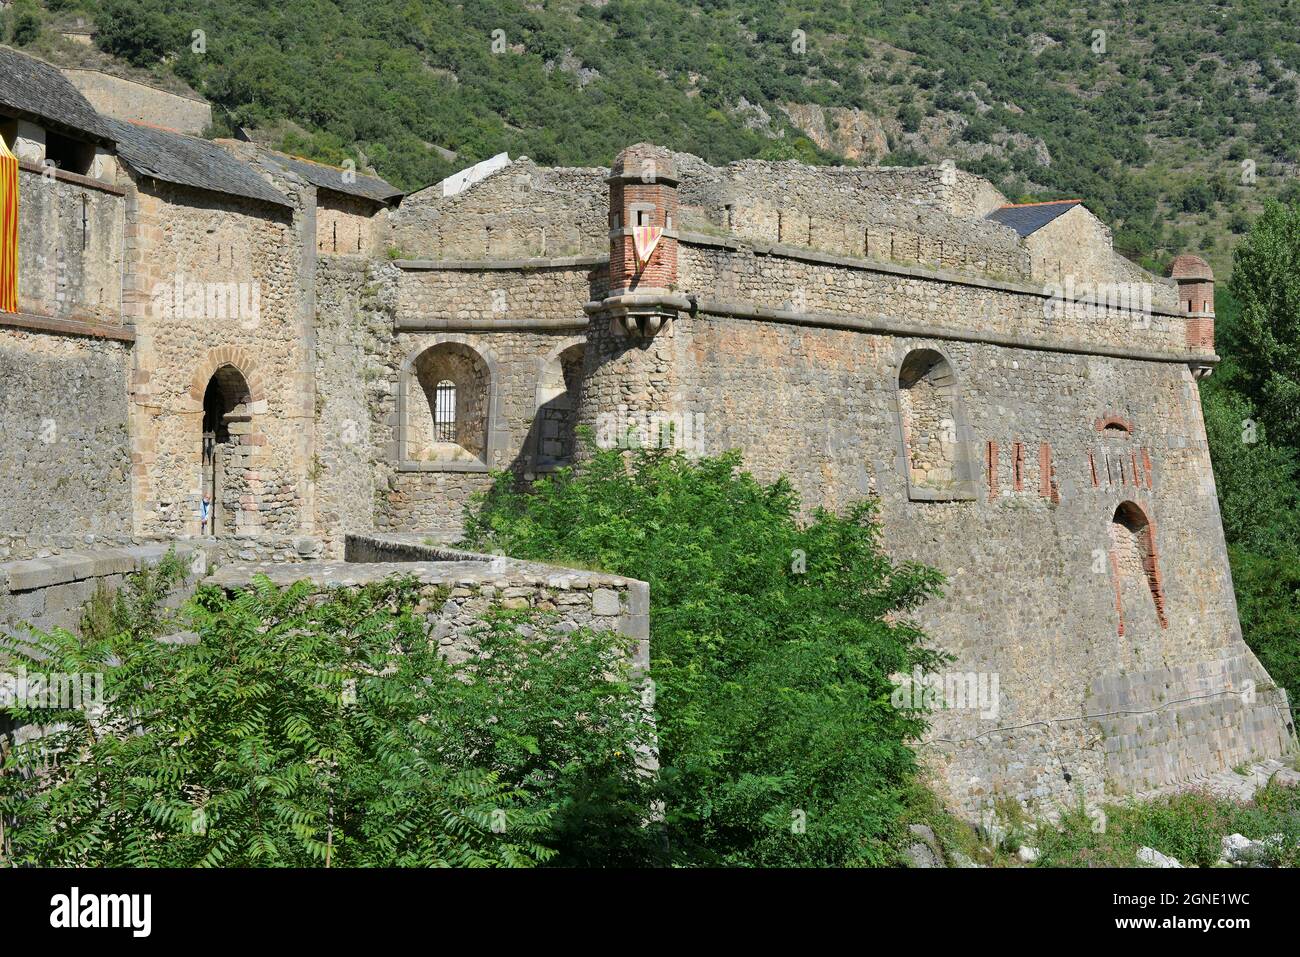 The medieval village of Villafranca de Conflent is located in the historical region of Conflent, France Stock Photo